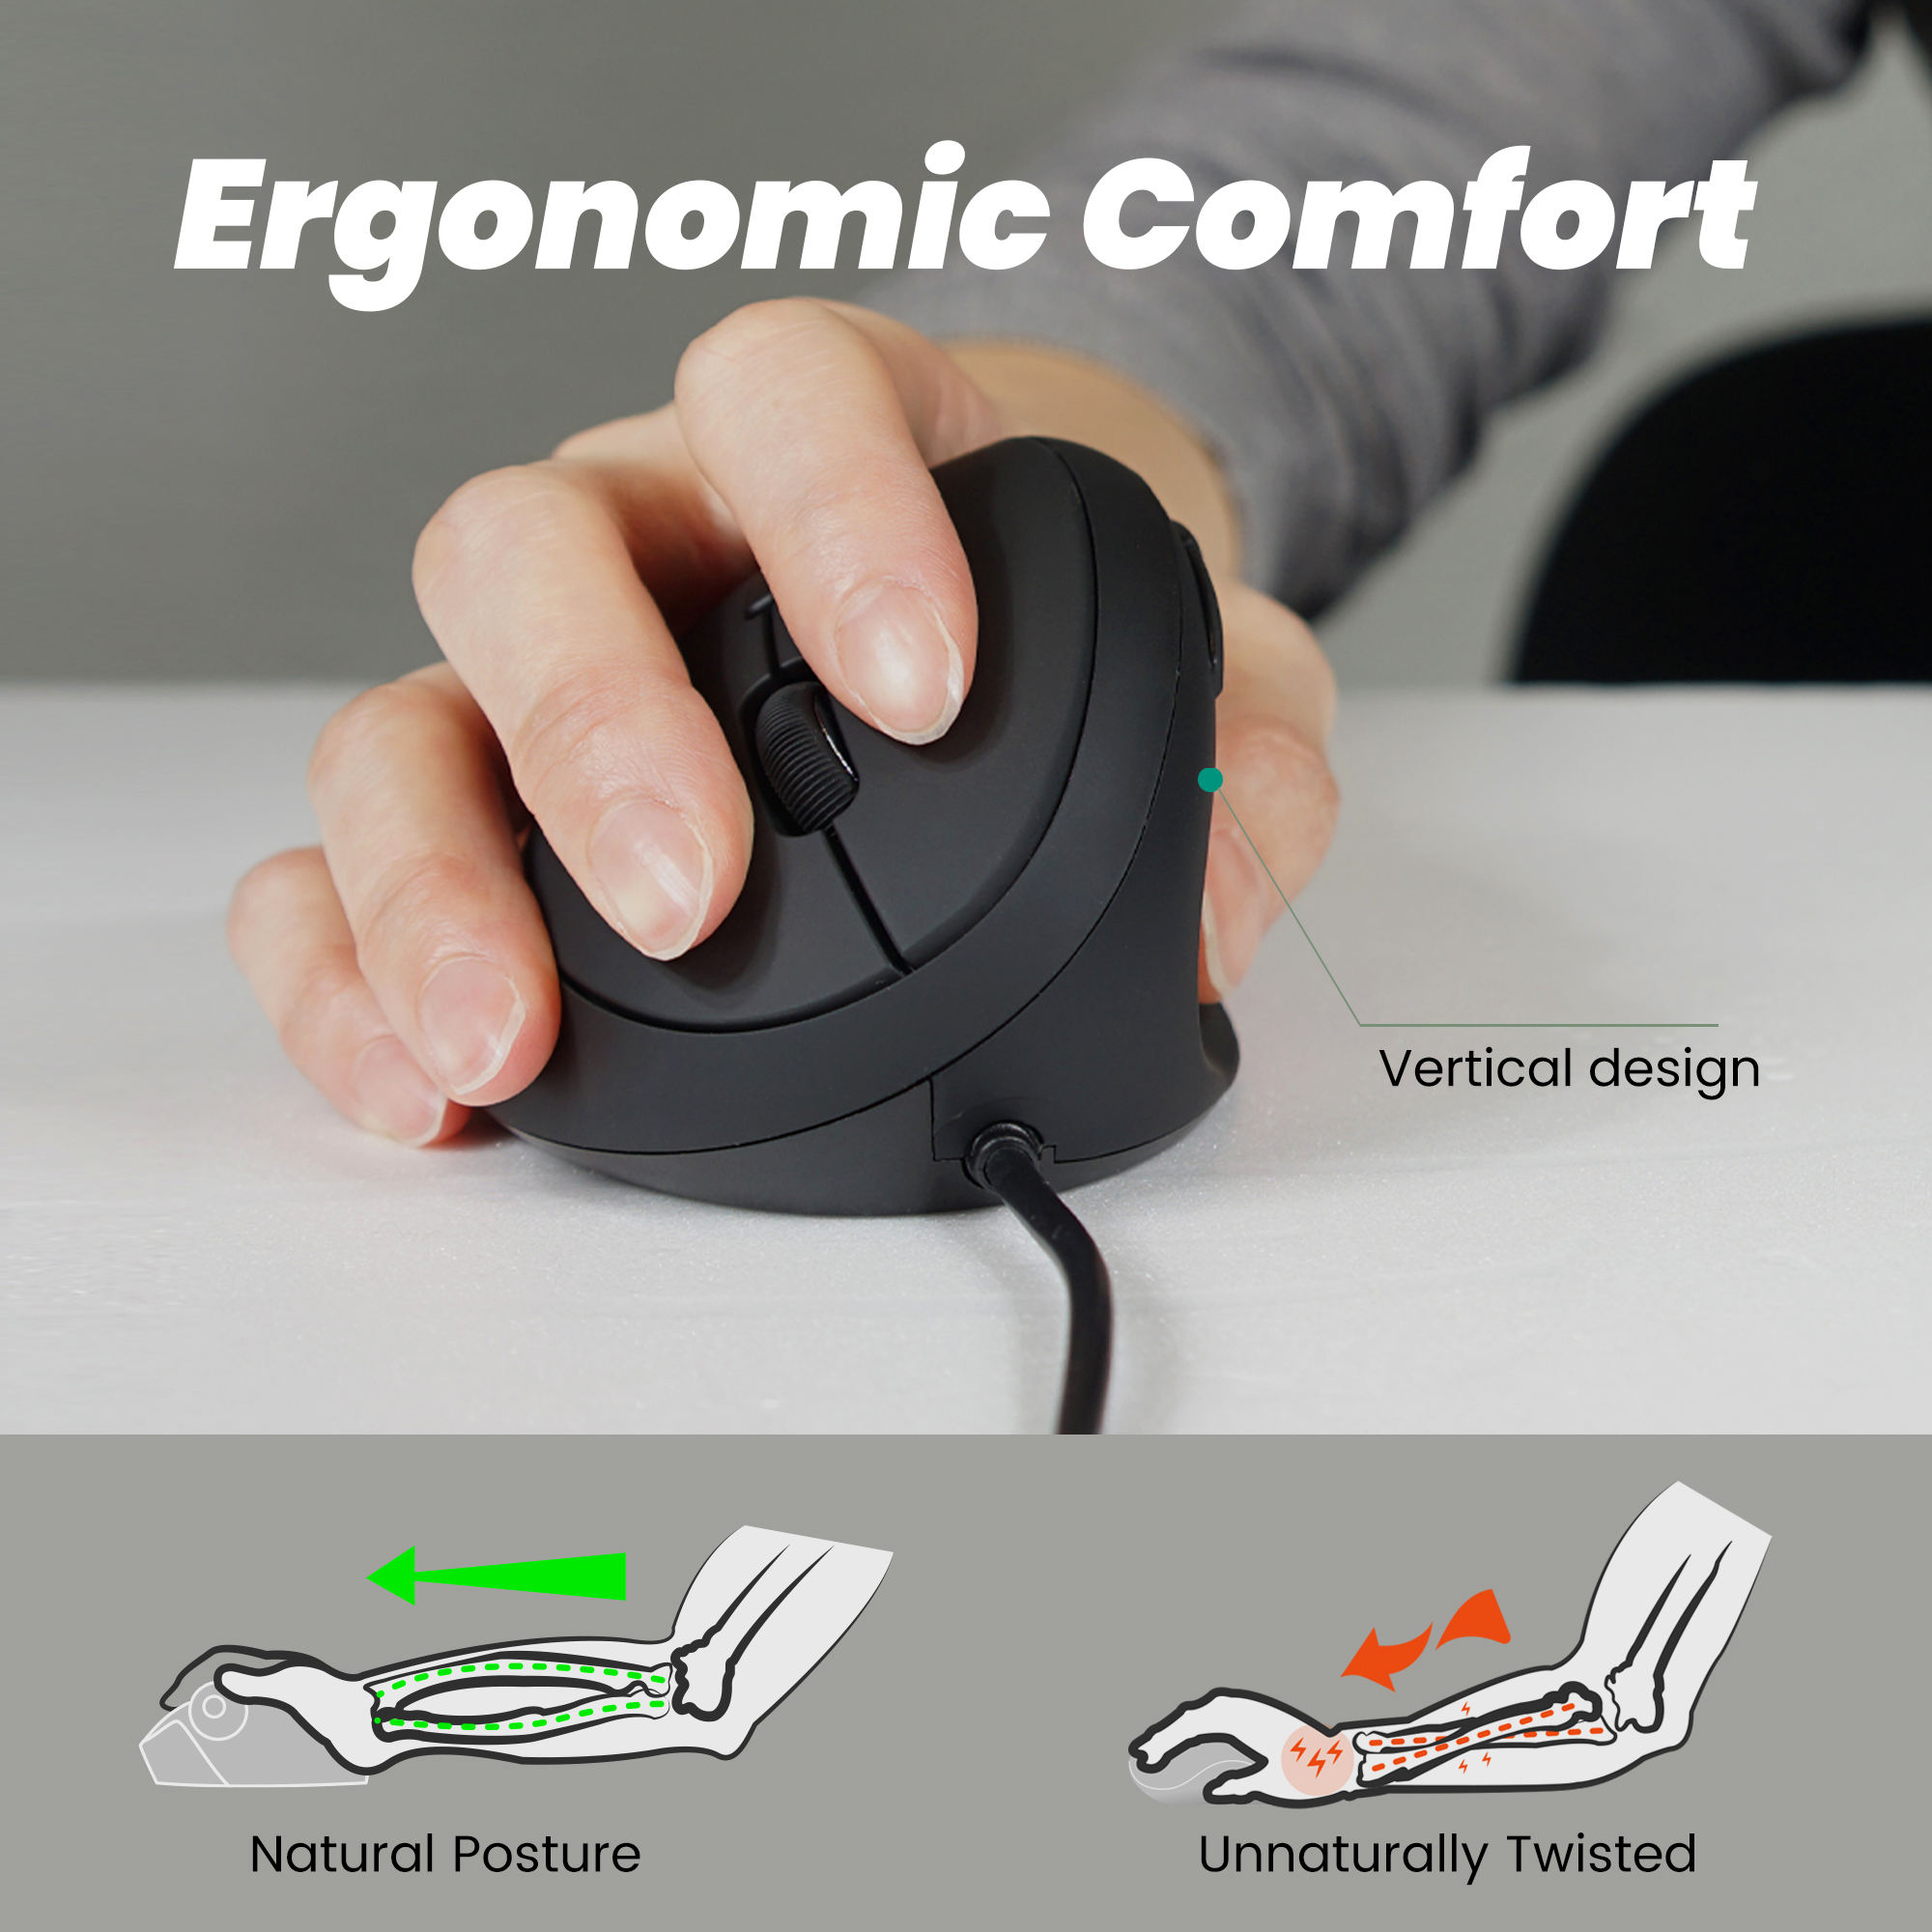 Comfortable Grip and Smooth Surface